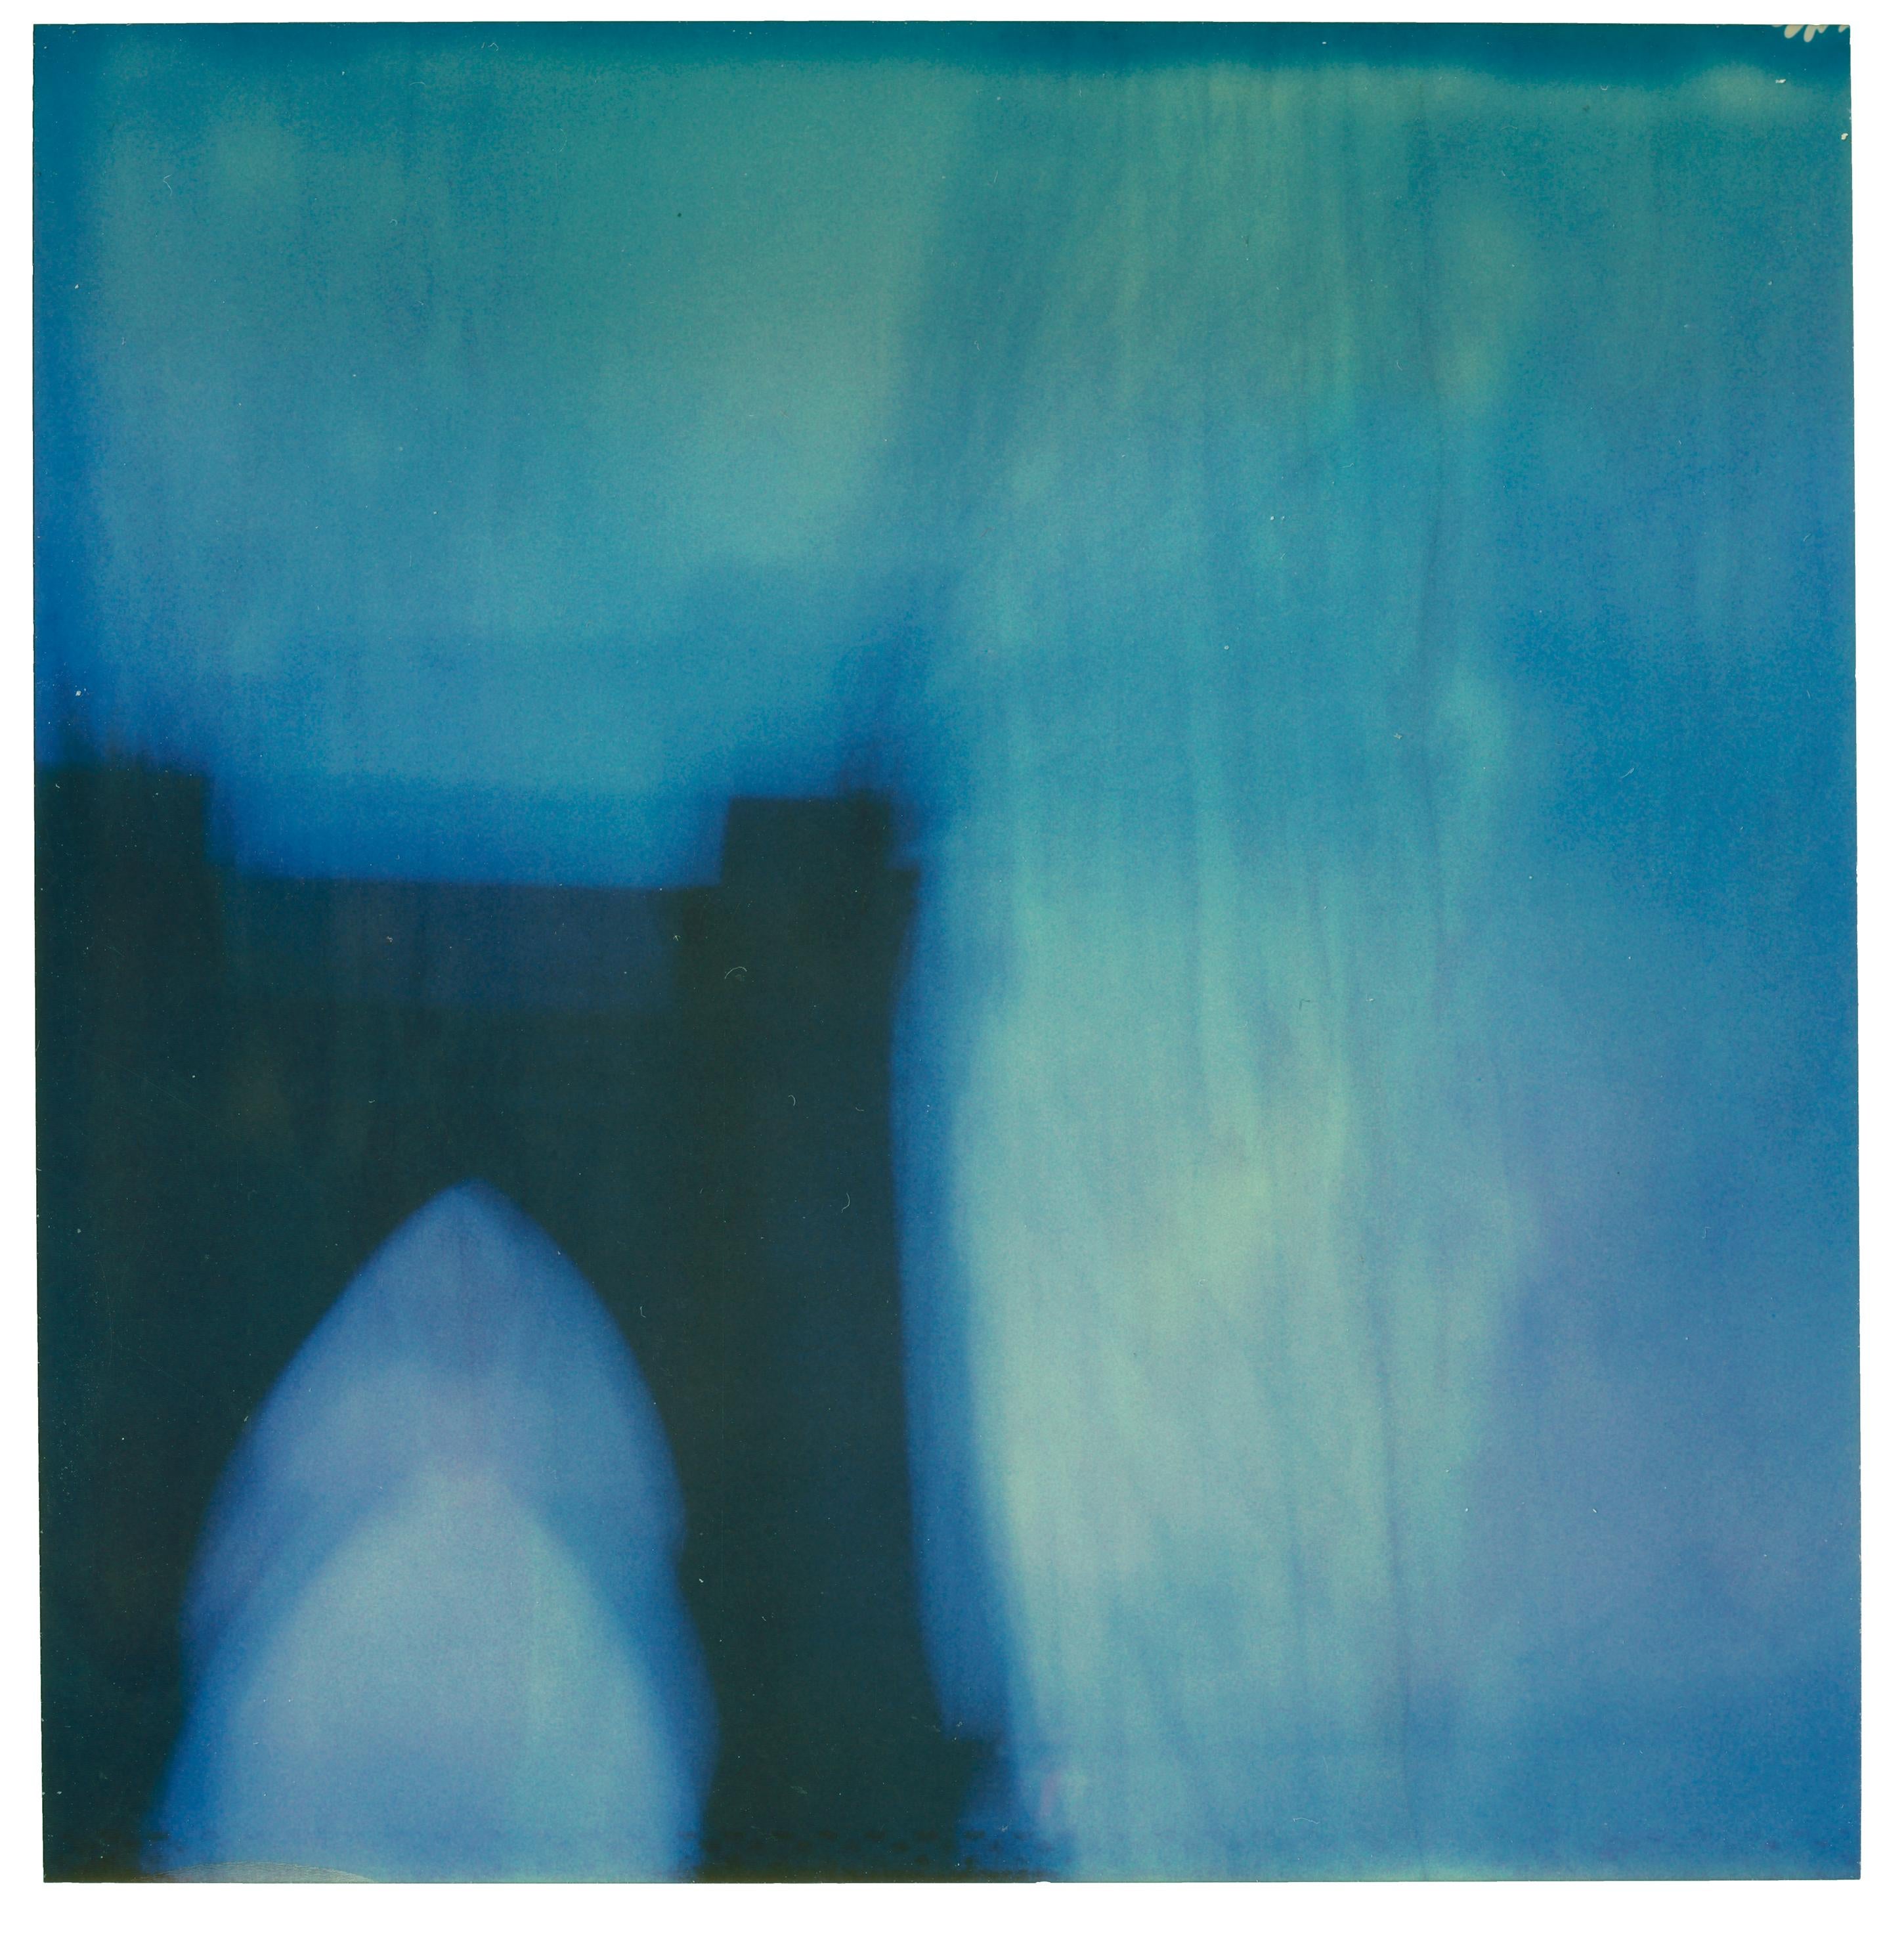 Finished Bridge (Stay) - Contemporary, Abstract, New York, USA, Polaroid, Blue